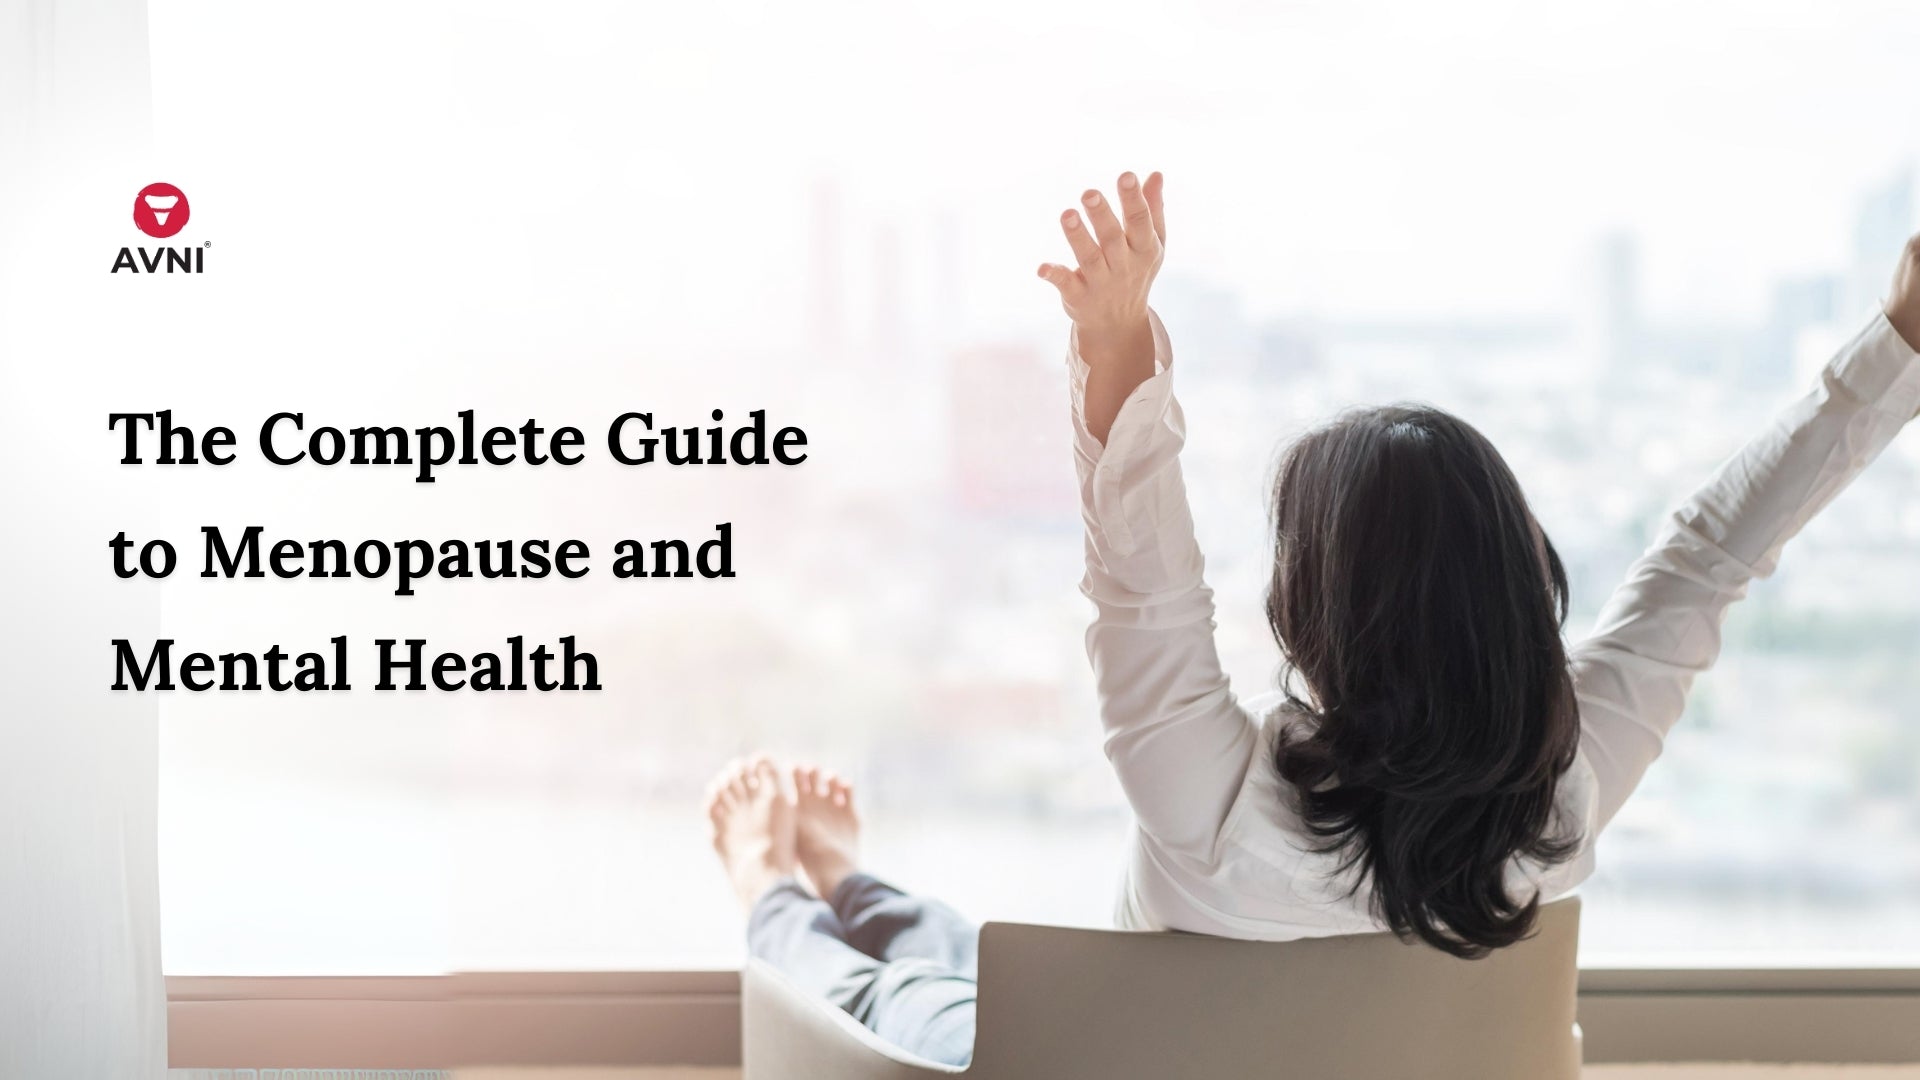 The Complete Guide to Menopause and Mental Health